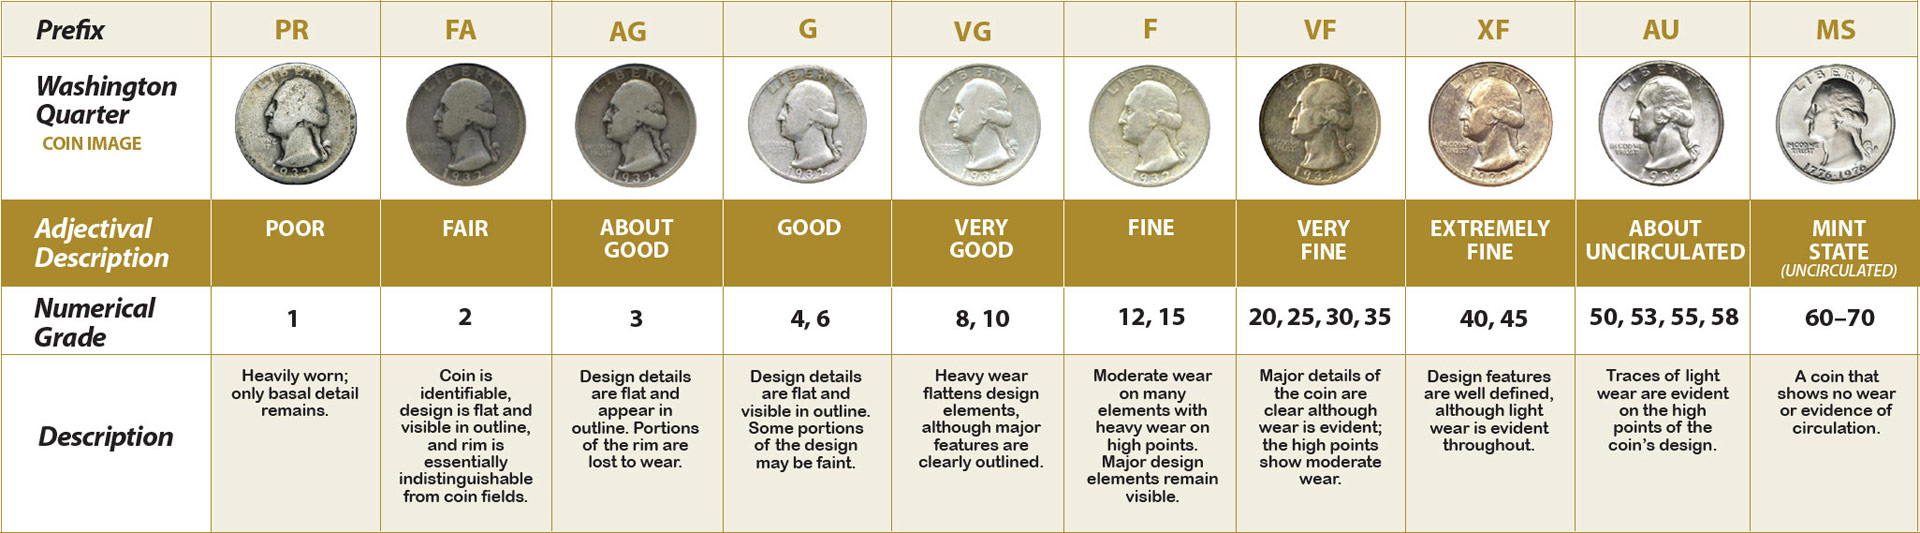 How to Get Coins Graded: The Process, Cost, & Merit